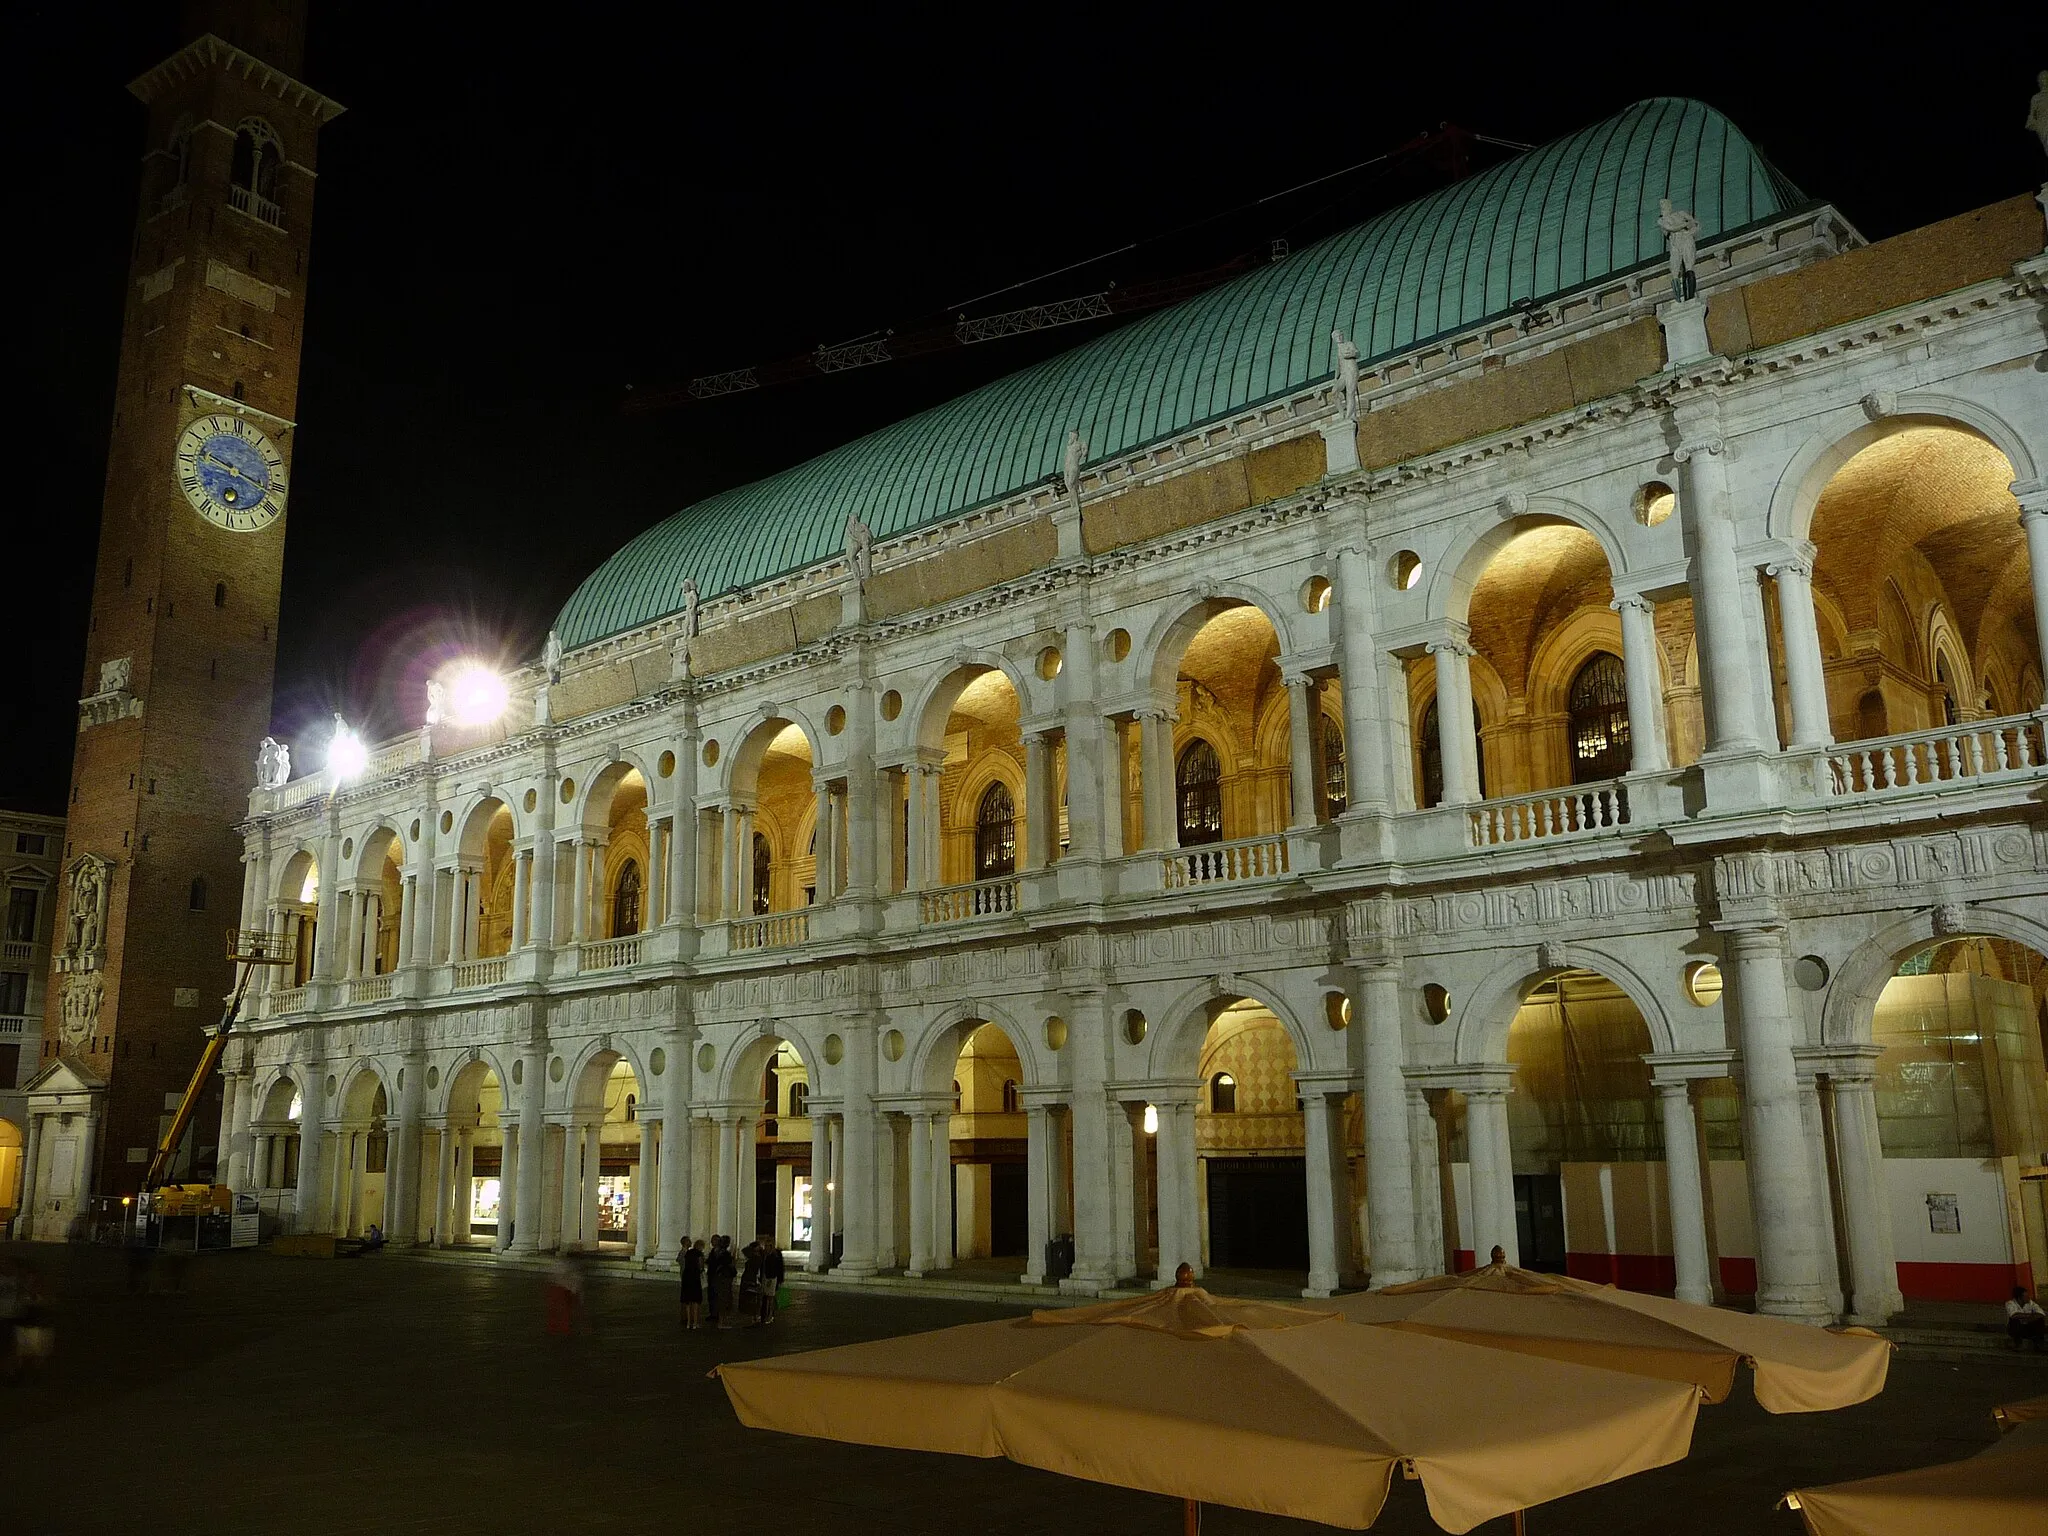 Photo showing: The Basilica Palladiana (Piazza dei Signori, Vicenza, Italy), illuminated by the new lighting system, which was inaugurated on September 18, 2011.